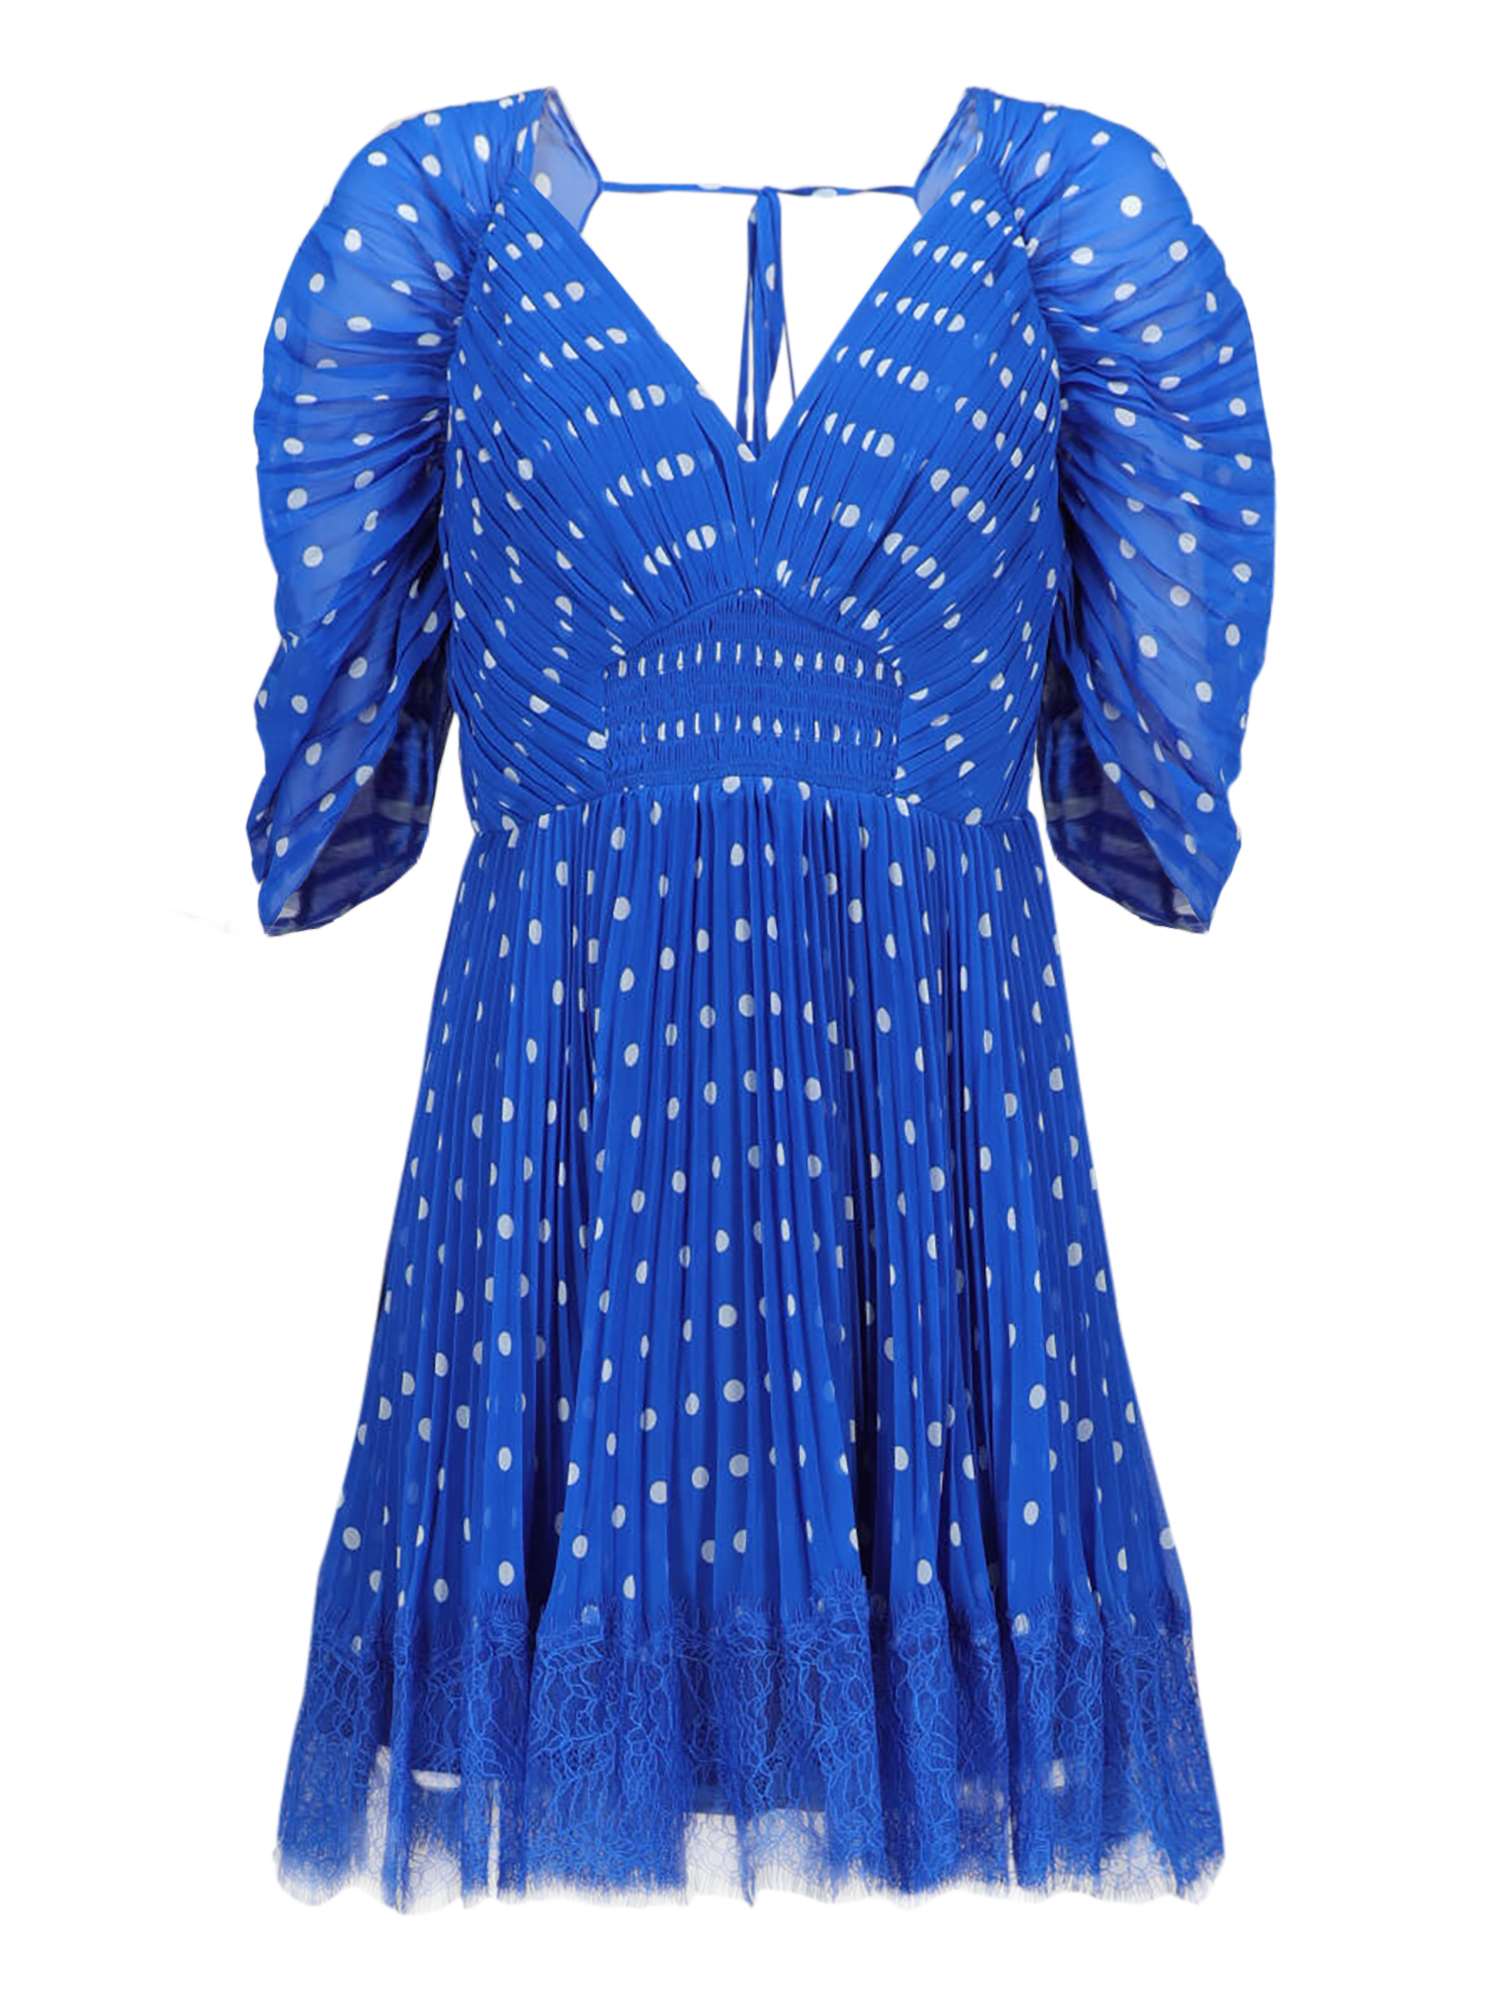 Condition: New With Tag, Polka Dot Synthetic Fibers, Color: Navy, White - M - US 8 -